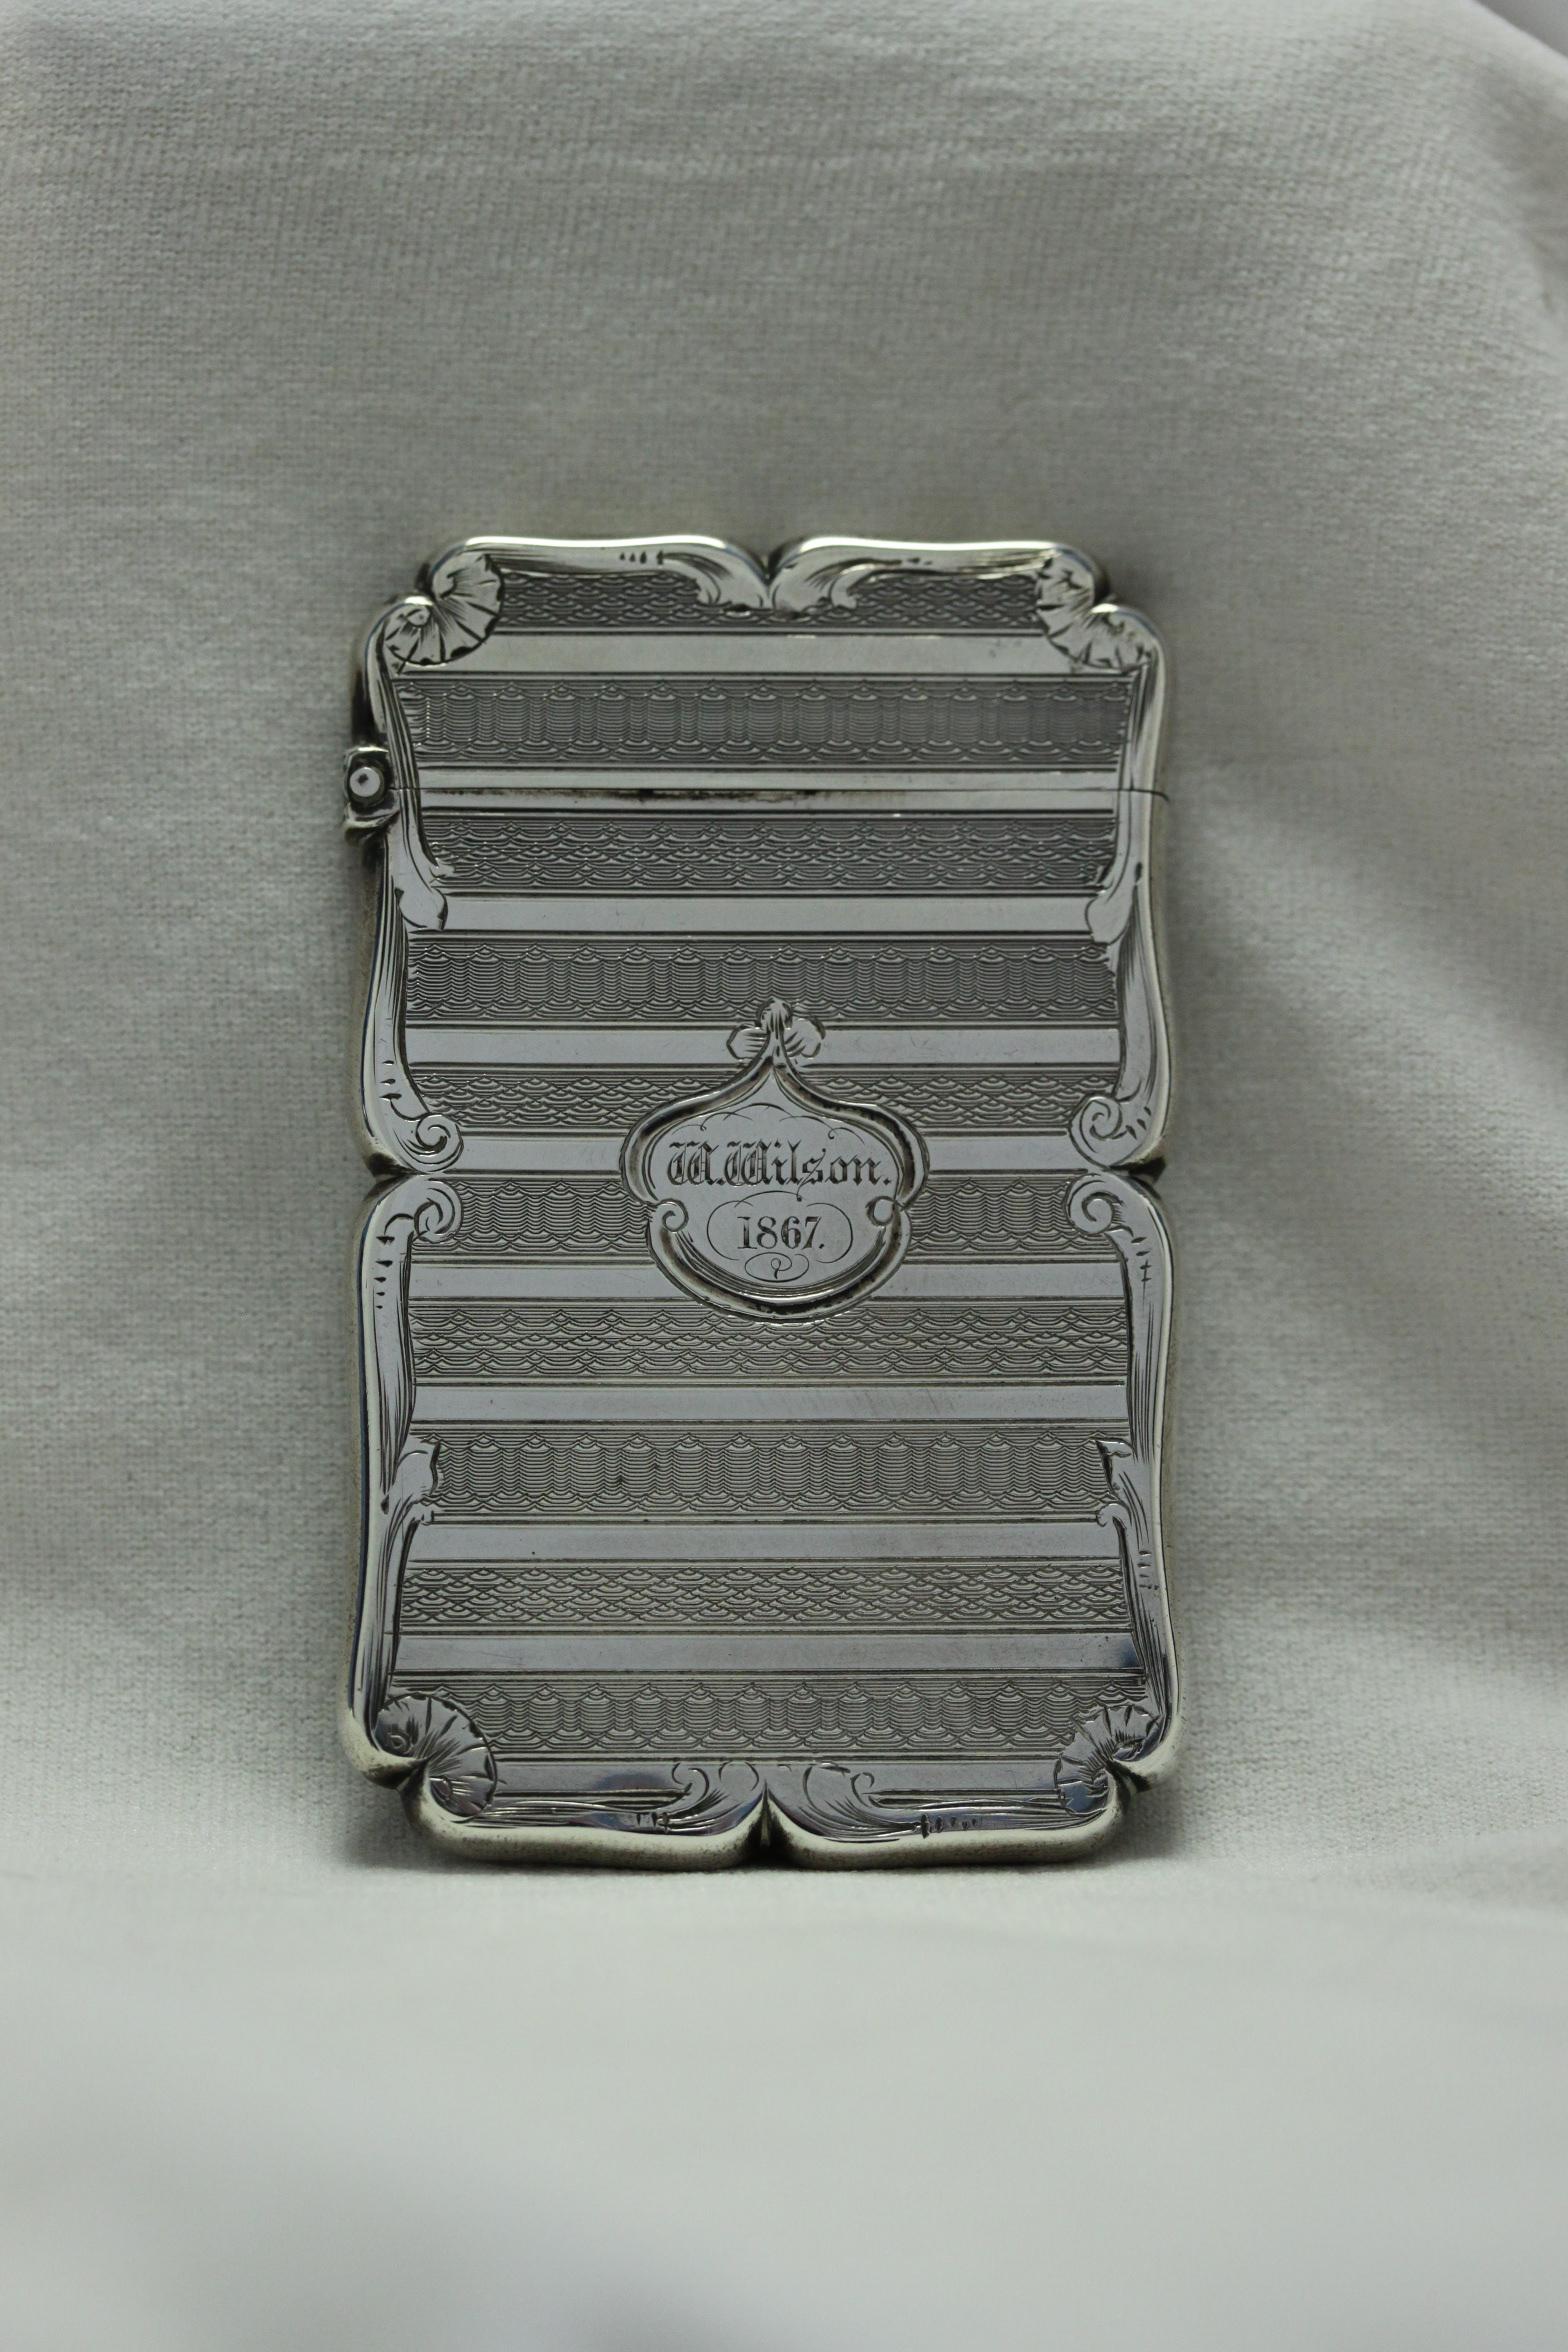 This very attractive sterling silver card case with a hinged top, was made by Edward Smith of Birmingham in 1853. Smith was a good maker, noted for making card cases decorated with engine turning and engraving. Interestingly, although it was made in